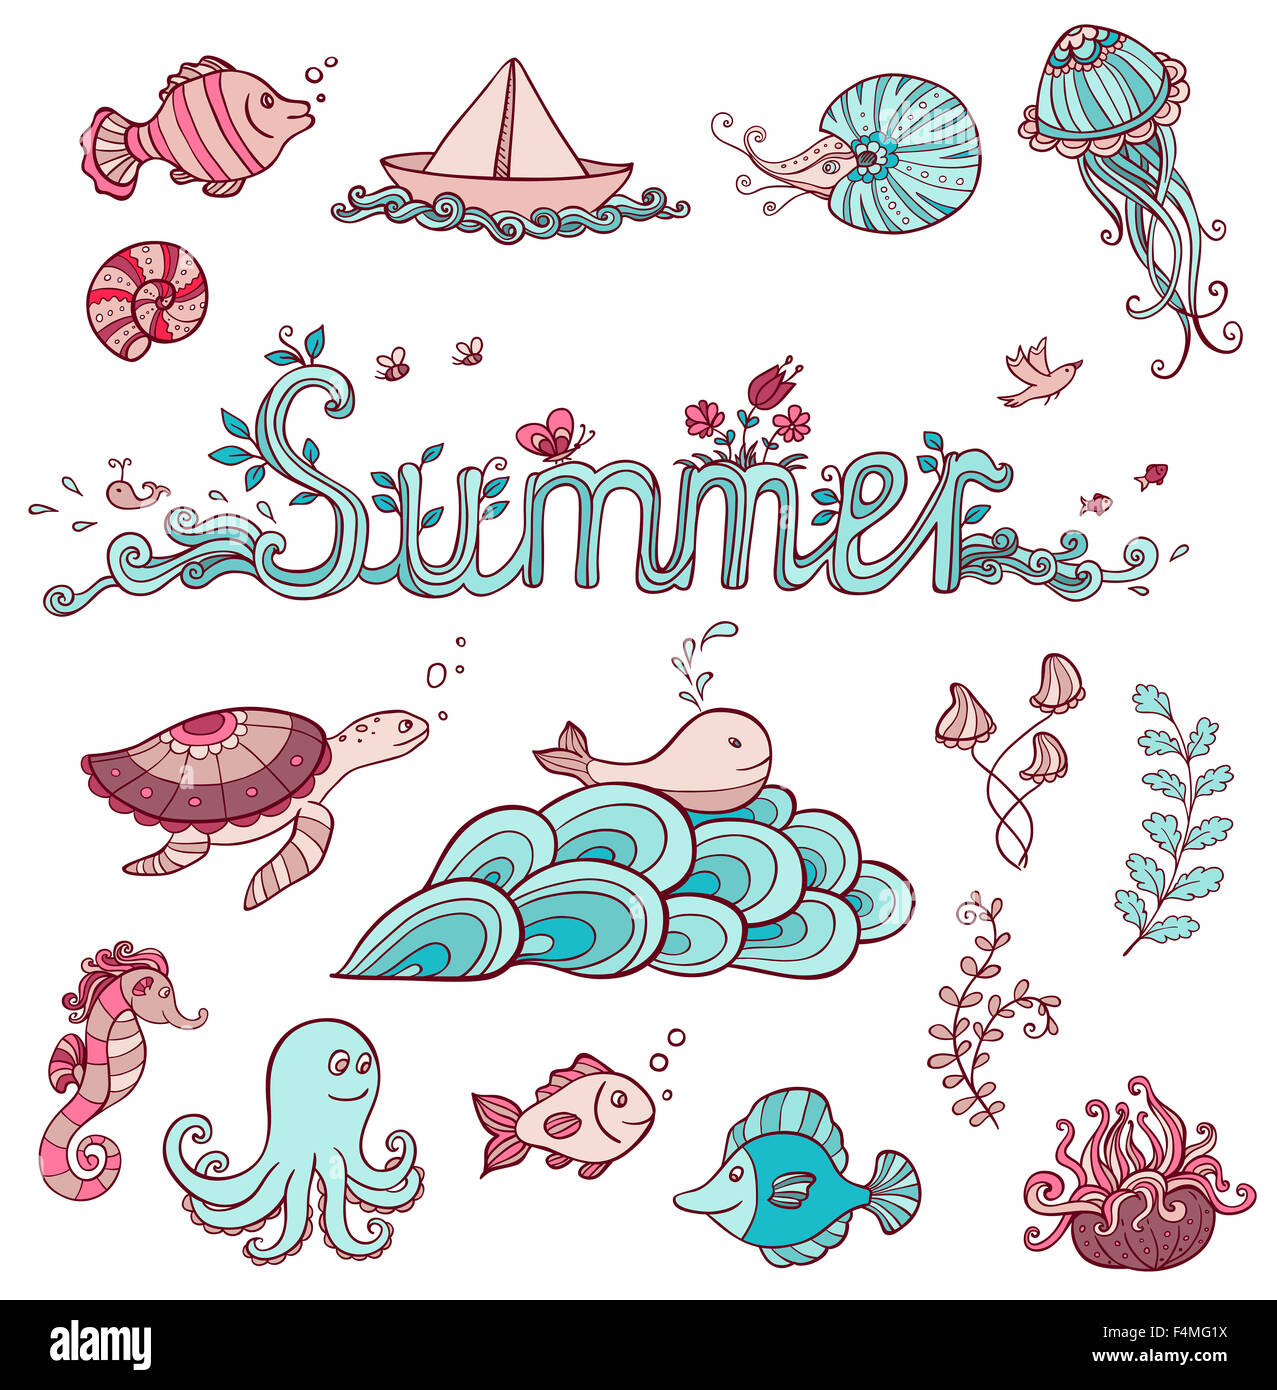 Set of sea doodle elements for design Stock Photo